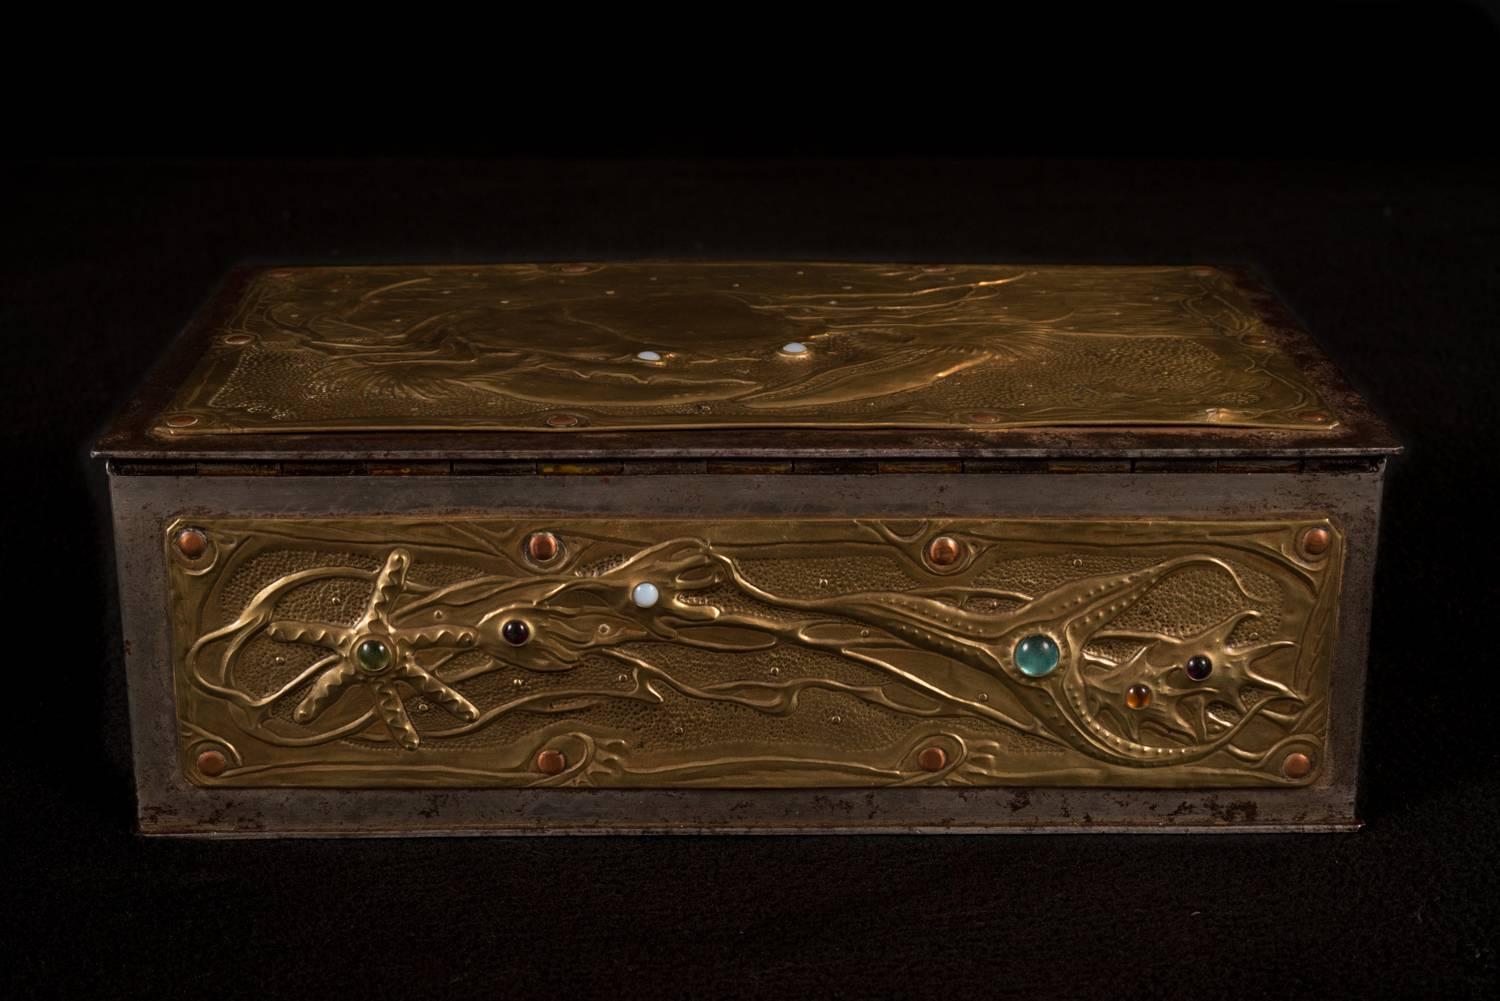 MYSTERIES OF THE OCEAN, Strongbox by Alfred Louis Achille Daguet, 1907, the iron box clad in brass sheets worked in repousse, finely chased and adorned with colored glass cabochons and secured by copper and brass nails, marked verso “4” painted in